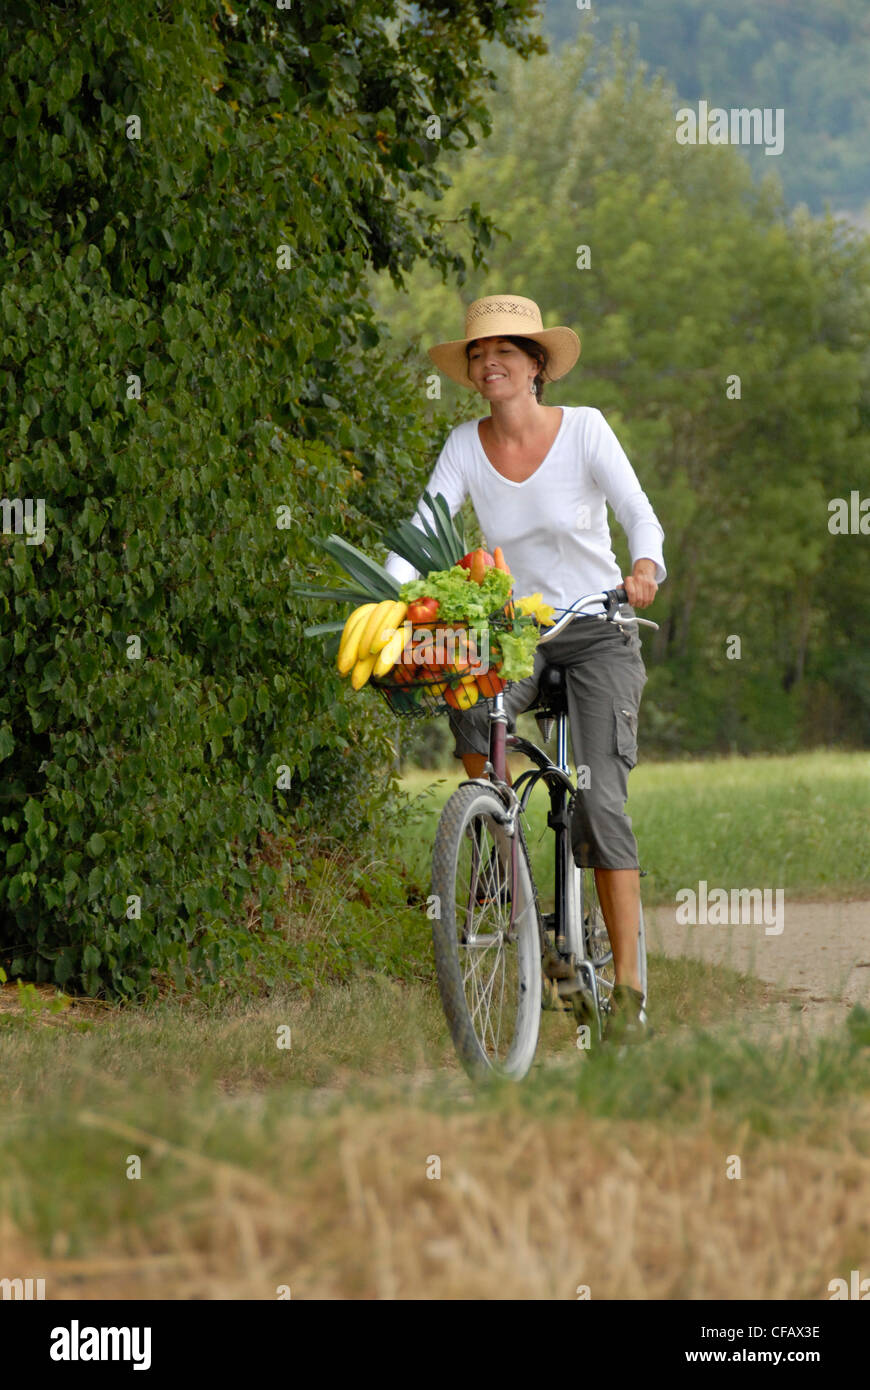 Summer, food, nutrition, land life, health, vegetables, fruits, purchase, vitamins, bicycle, bike, healthy, woman, Switzerland, Stock Photo